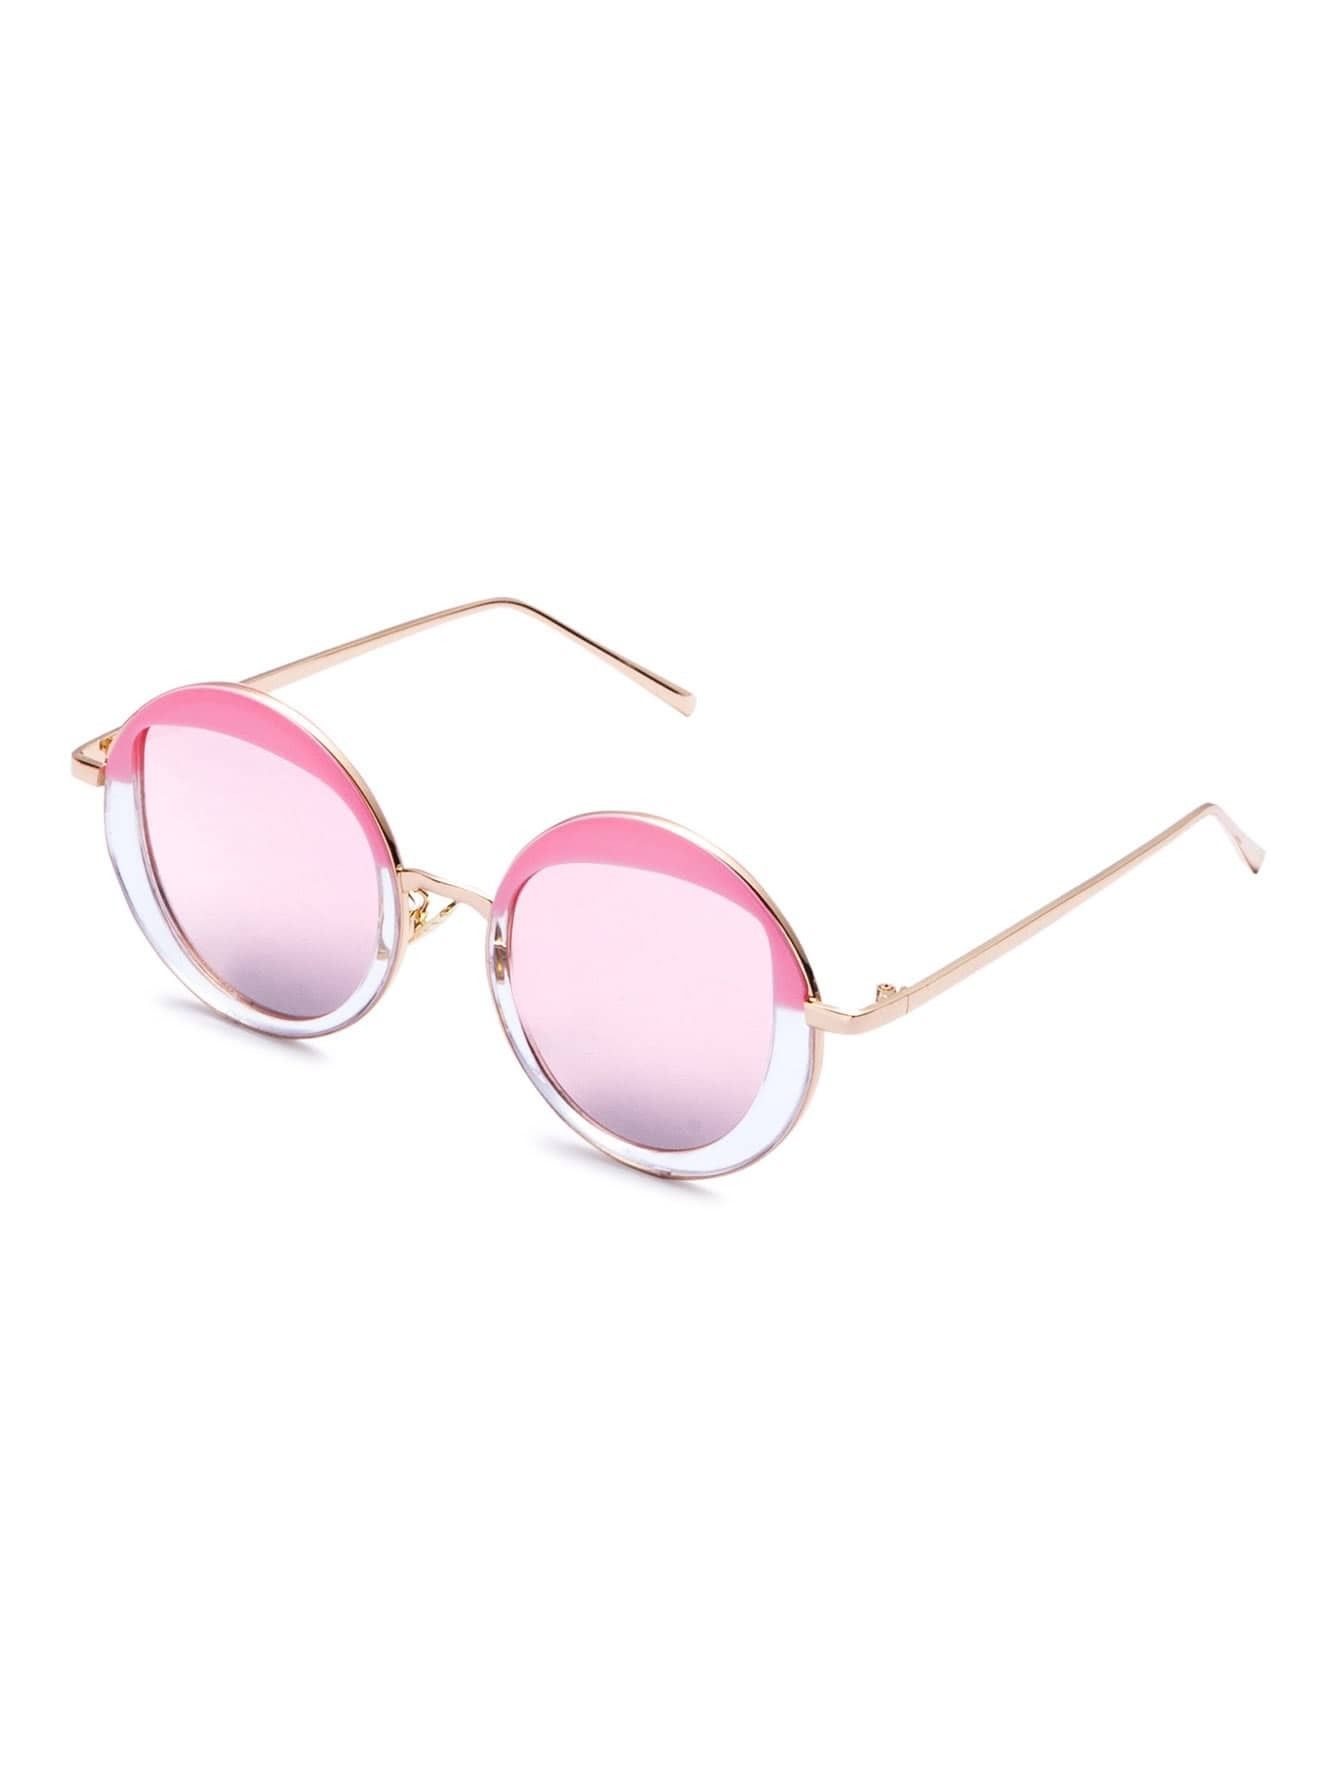 Pink And Gold Frame Round Design Sunglasses | SHEIN